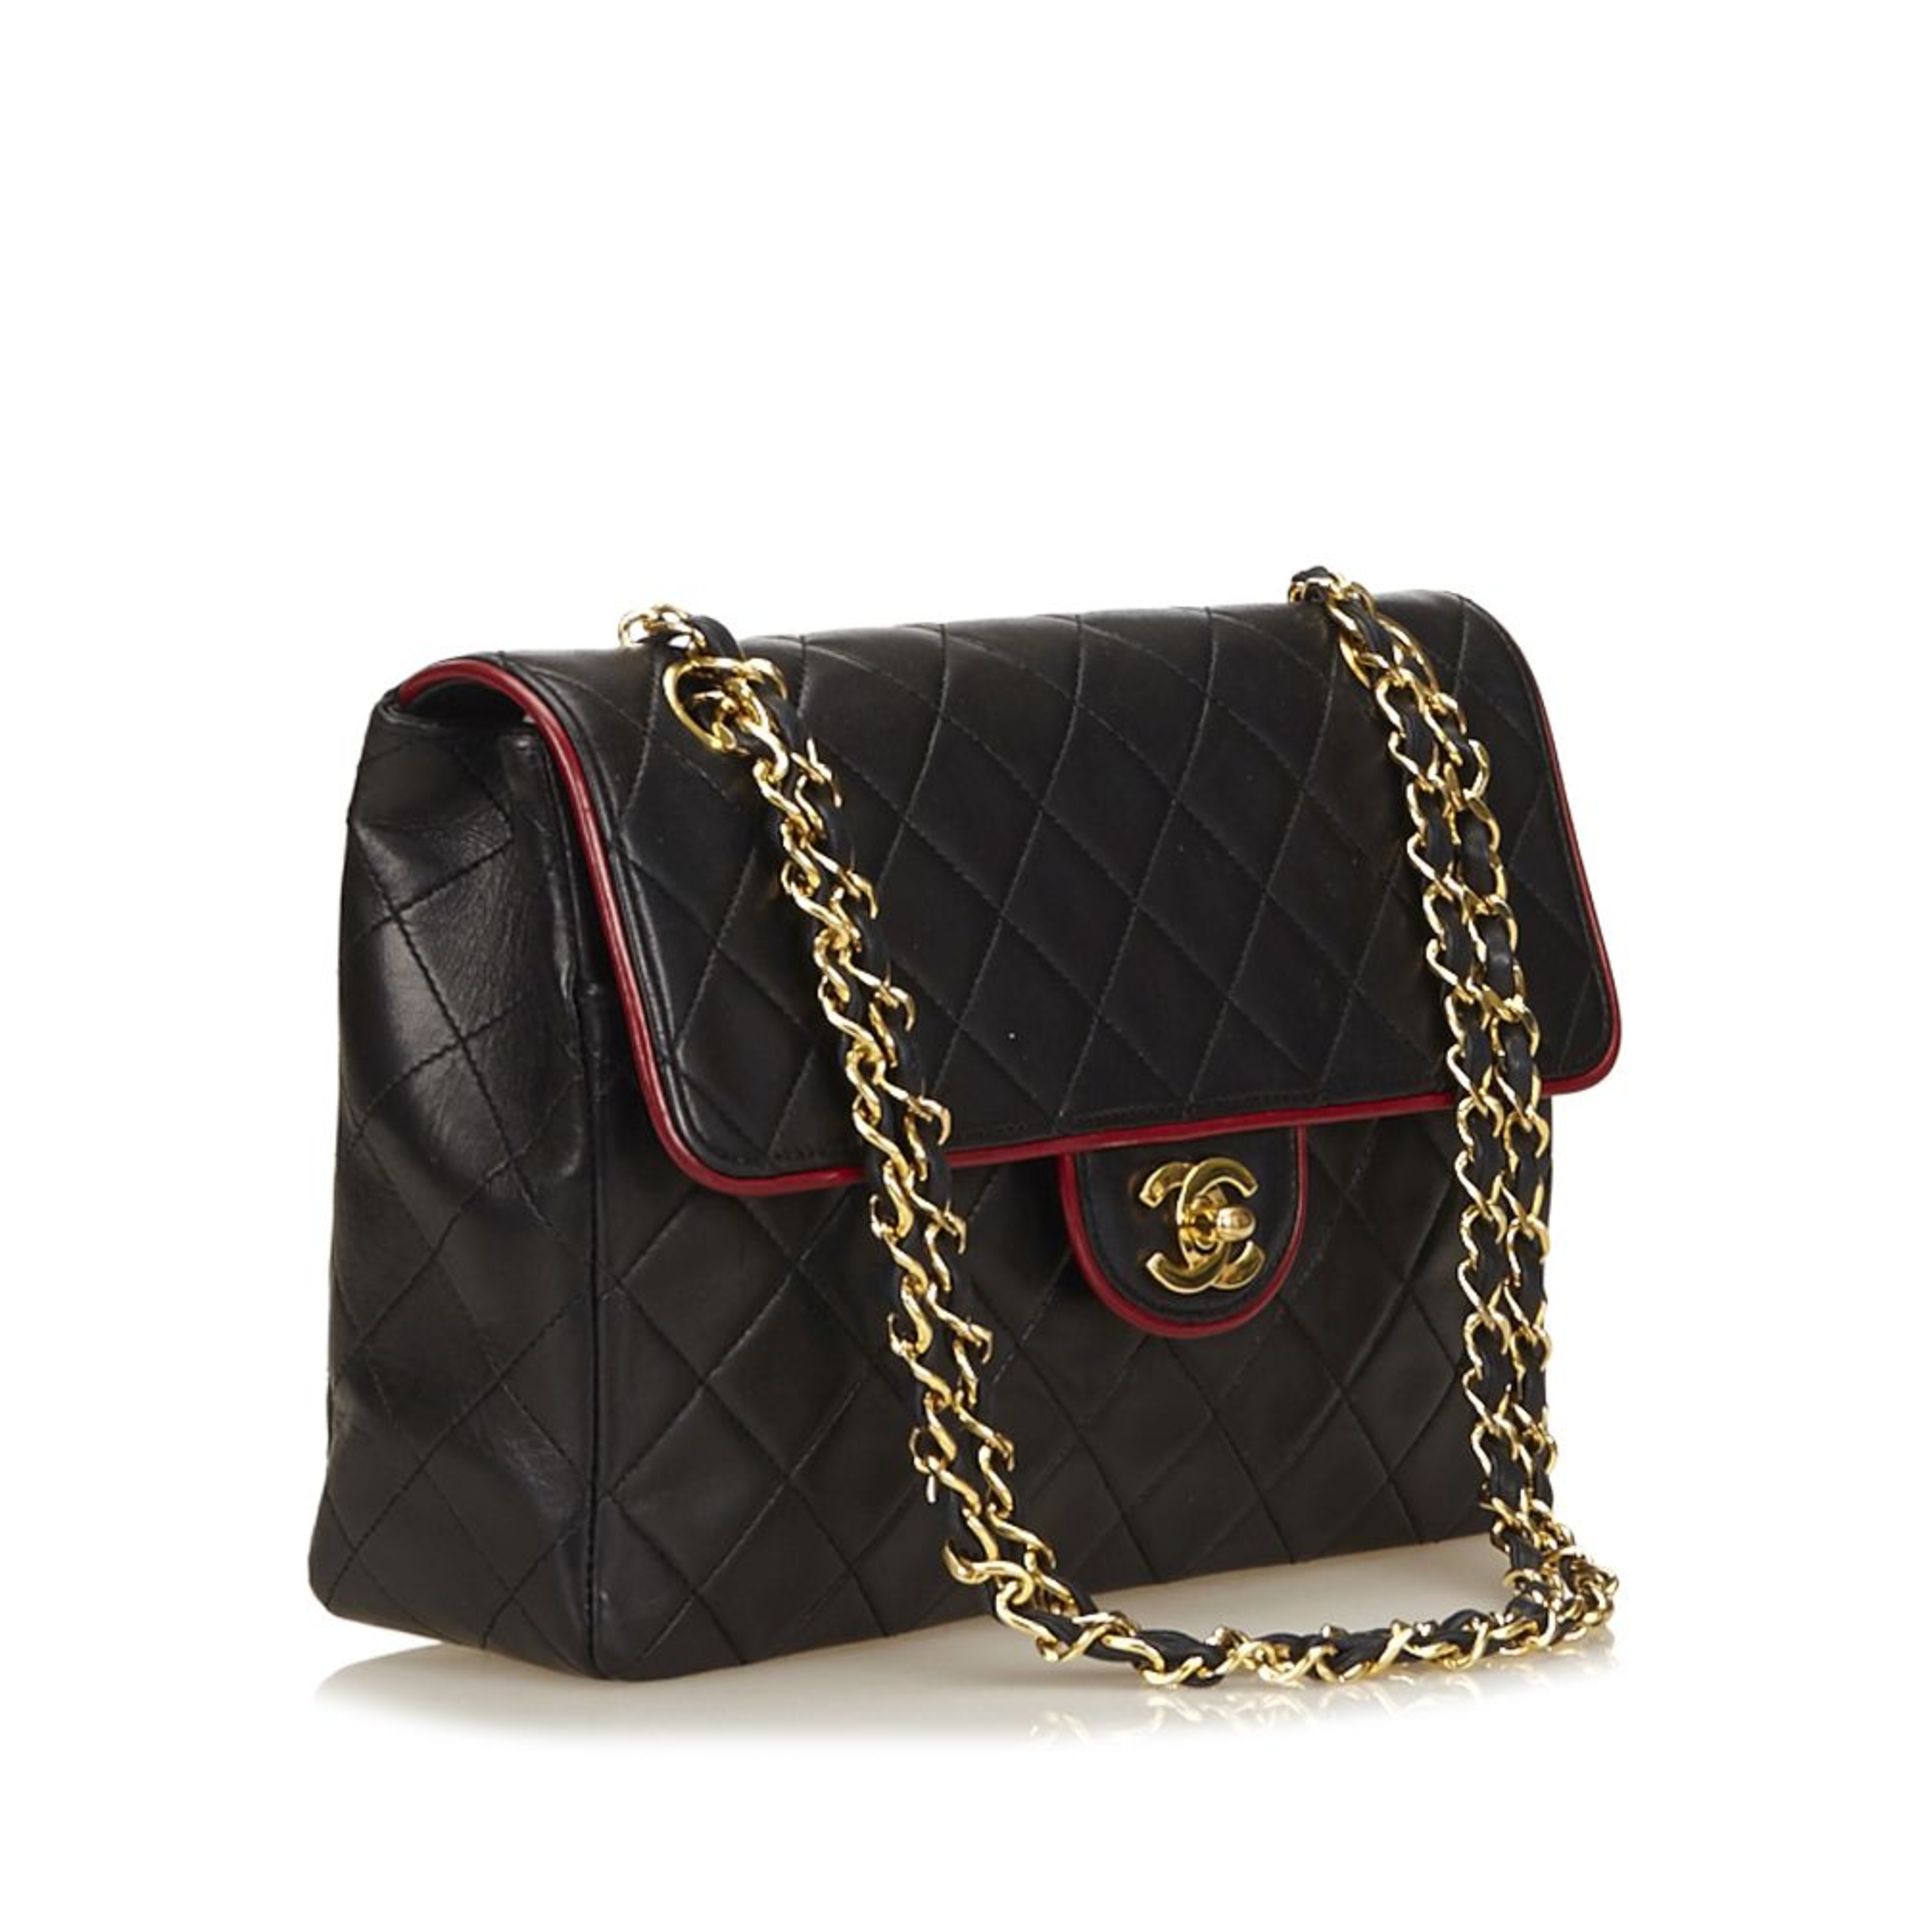 A Chanel quilted leather flap bag,featuring a quilted leather body, a gold-tone shoulder chain, - Image 2 of 3